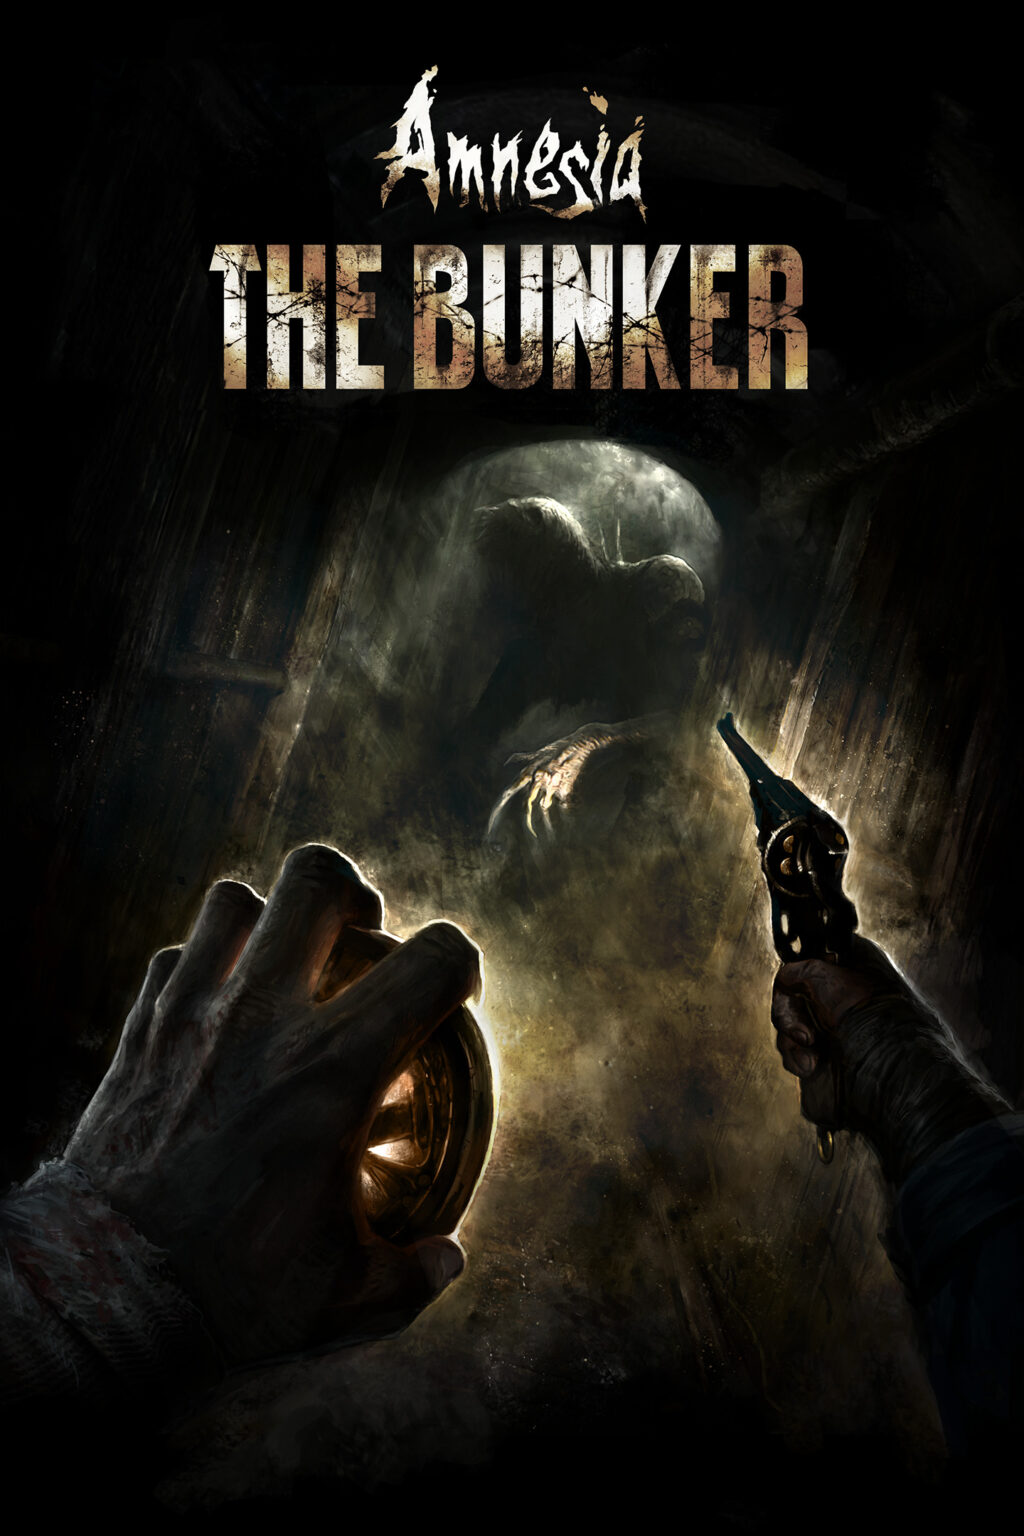 Amnesia The Bunker announced for Xbox Series, PS4, Xbox One, and PC